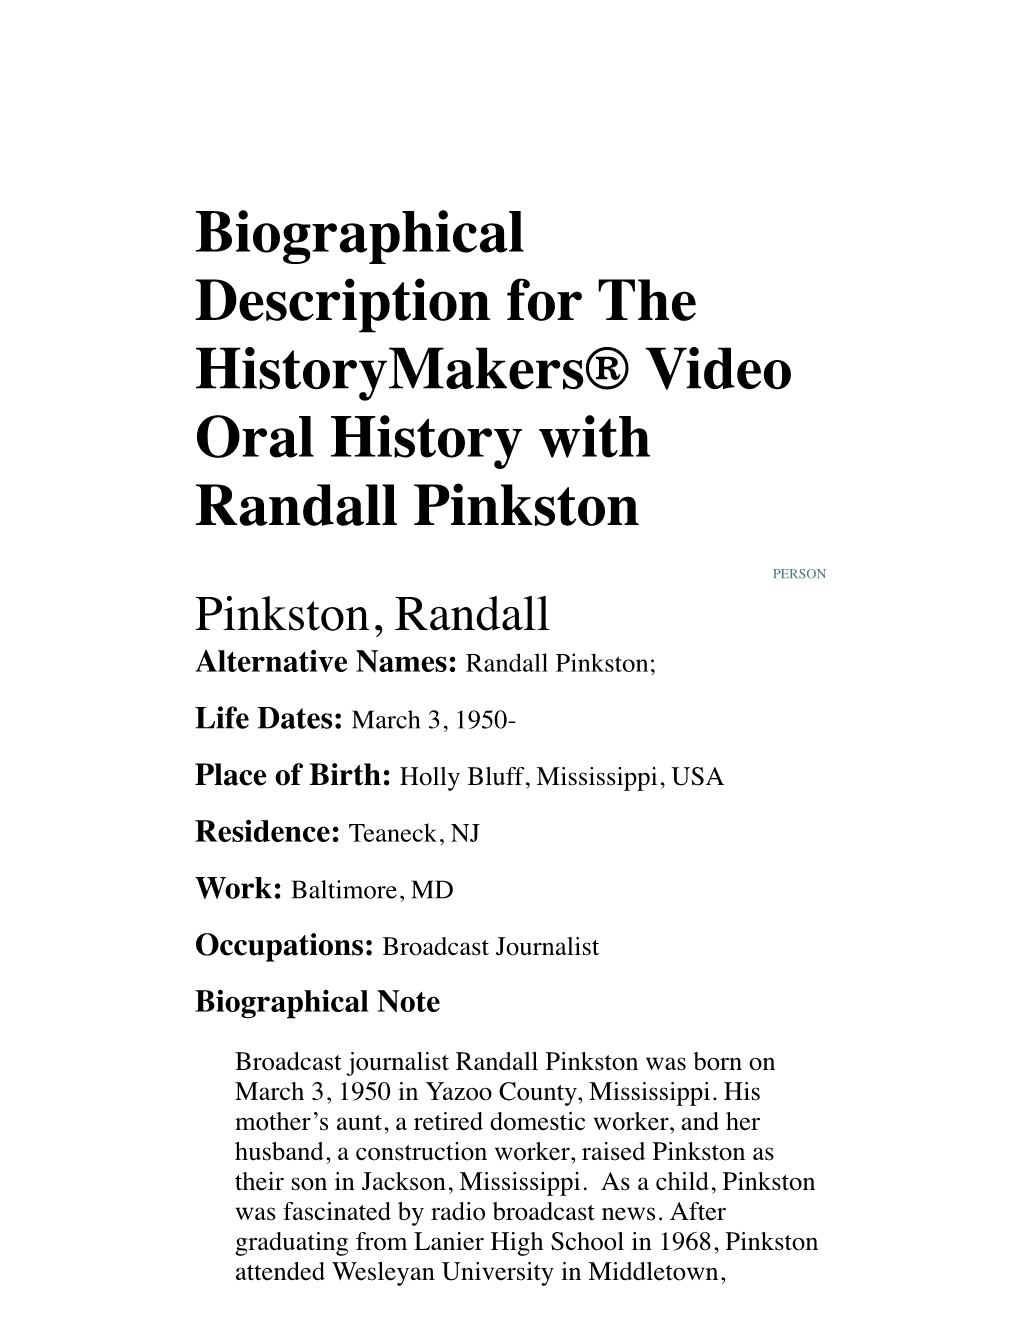 Biographical Description for the Historymakers® Video Oral History with Randall Pinkston